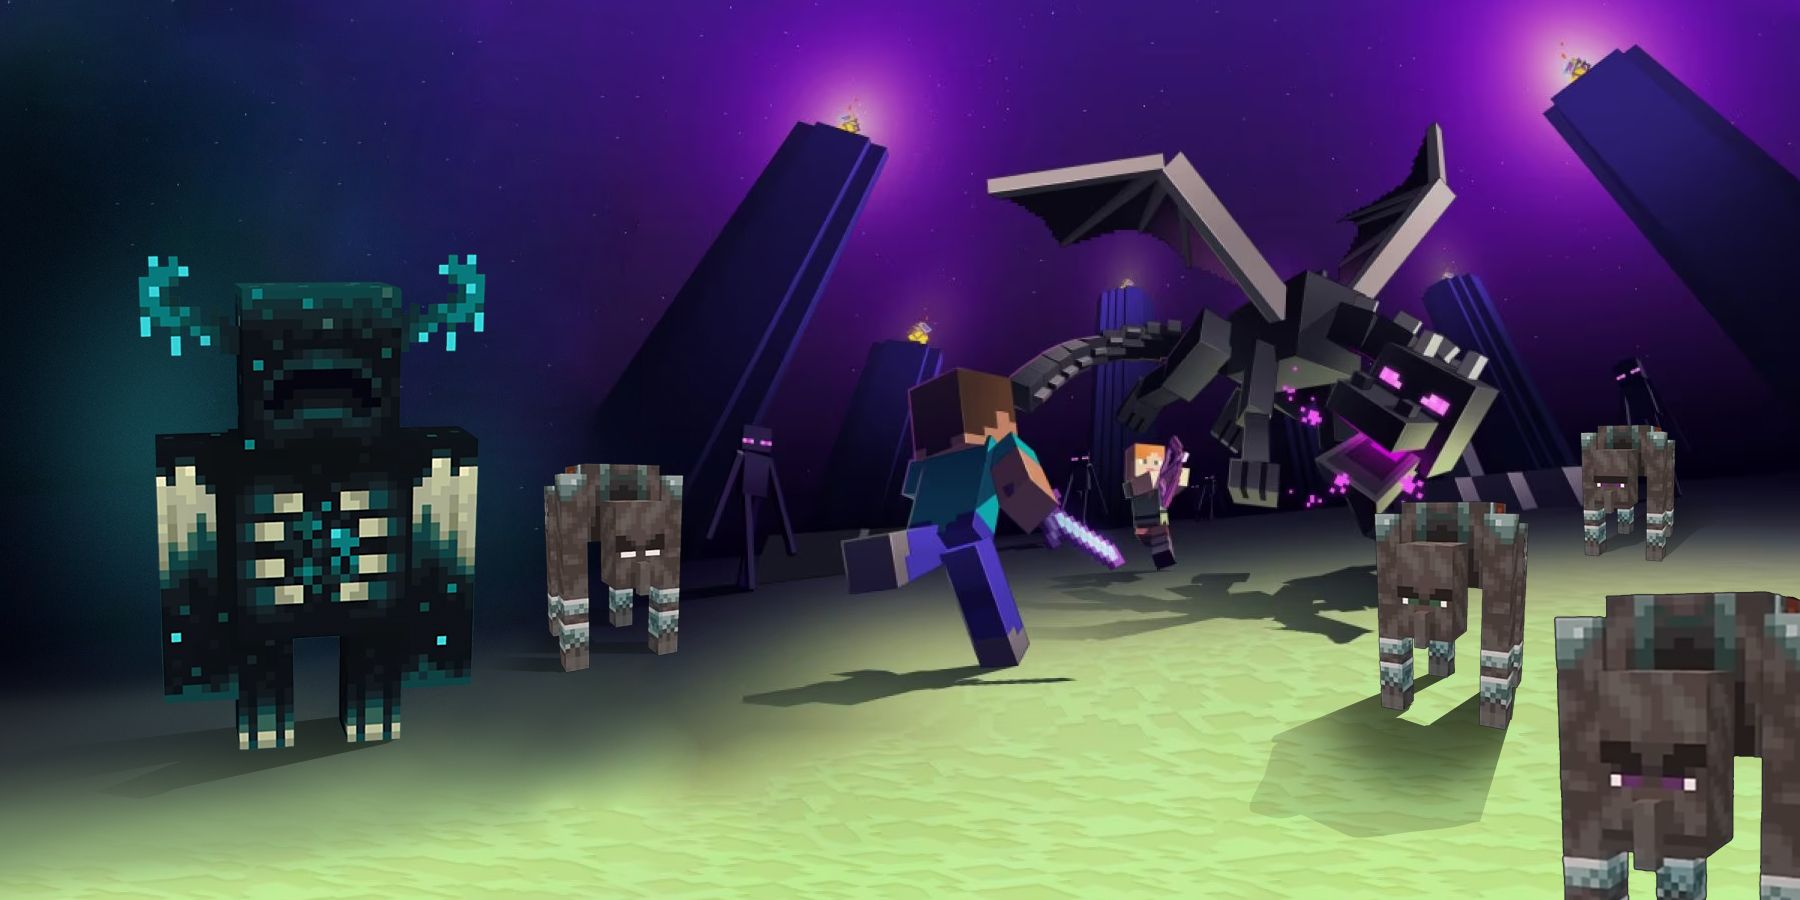 Our Minecraft hero faces off against the Ender Dragon, the Warden, and a pack of Ravagers!